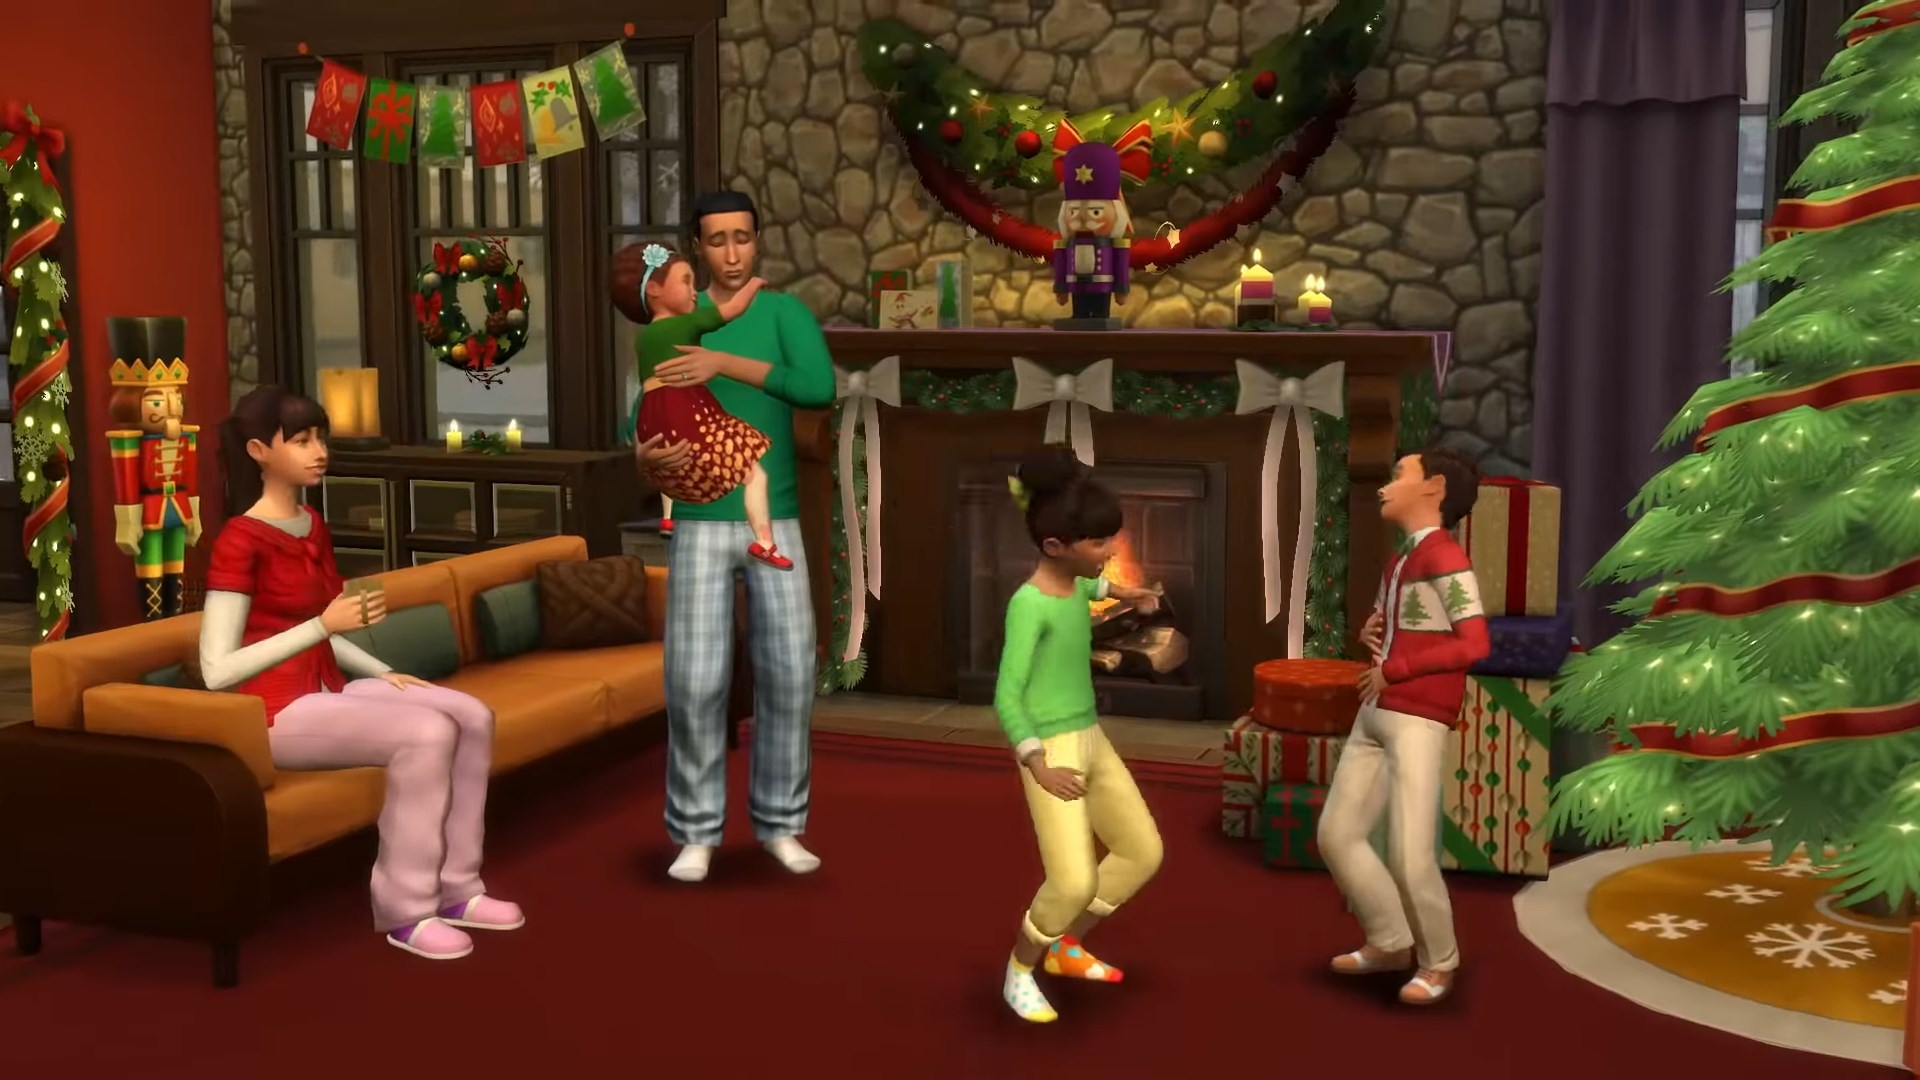 Sims celebrate a winter holiday in The Sims 4: Seasons